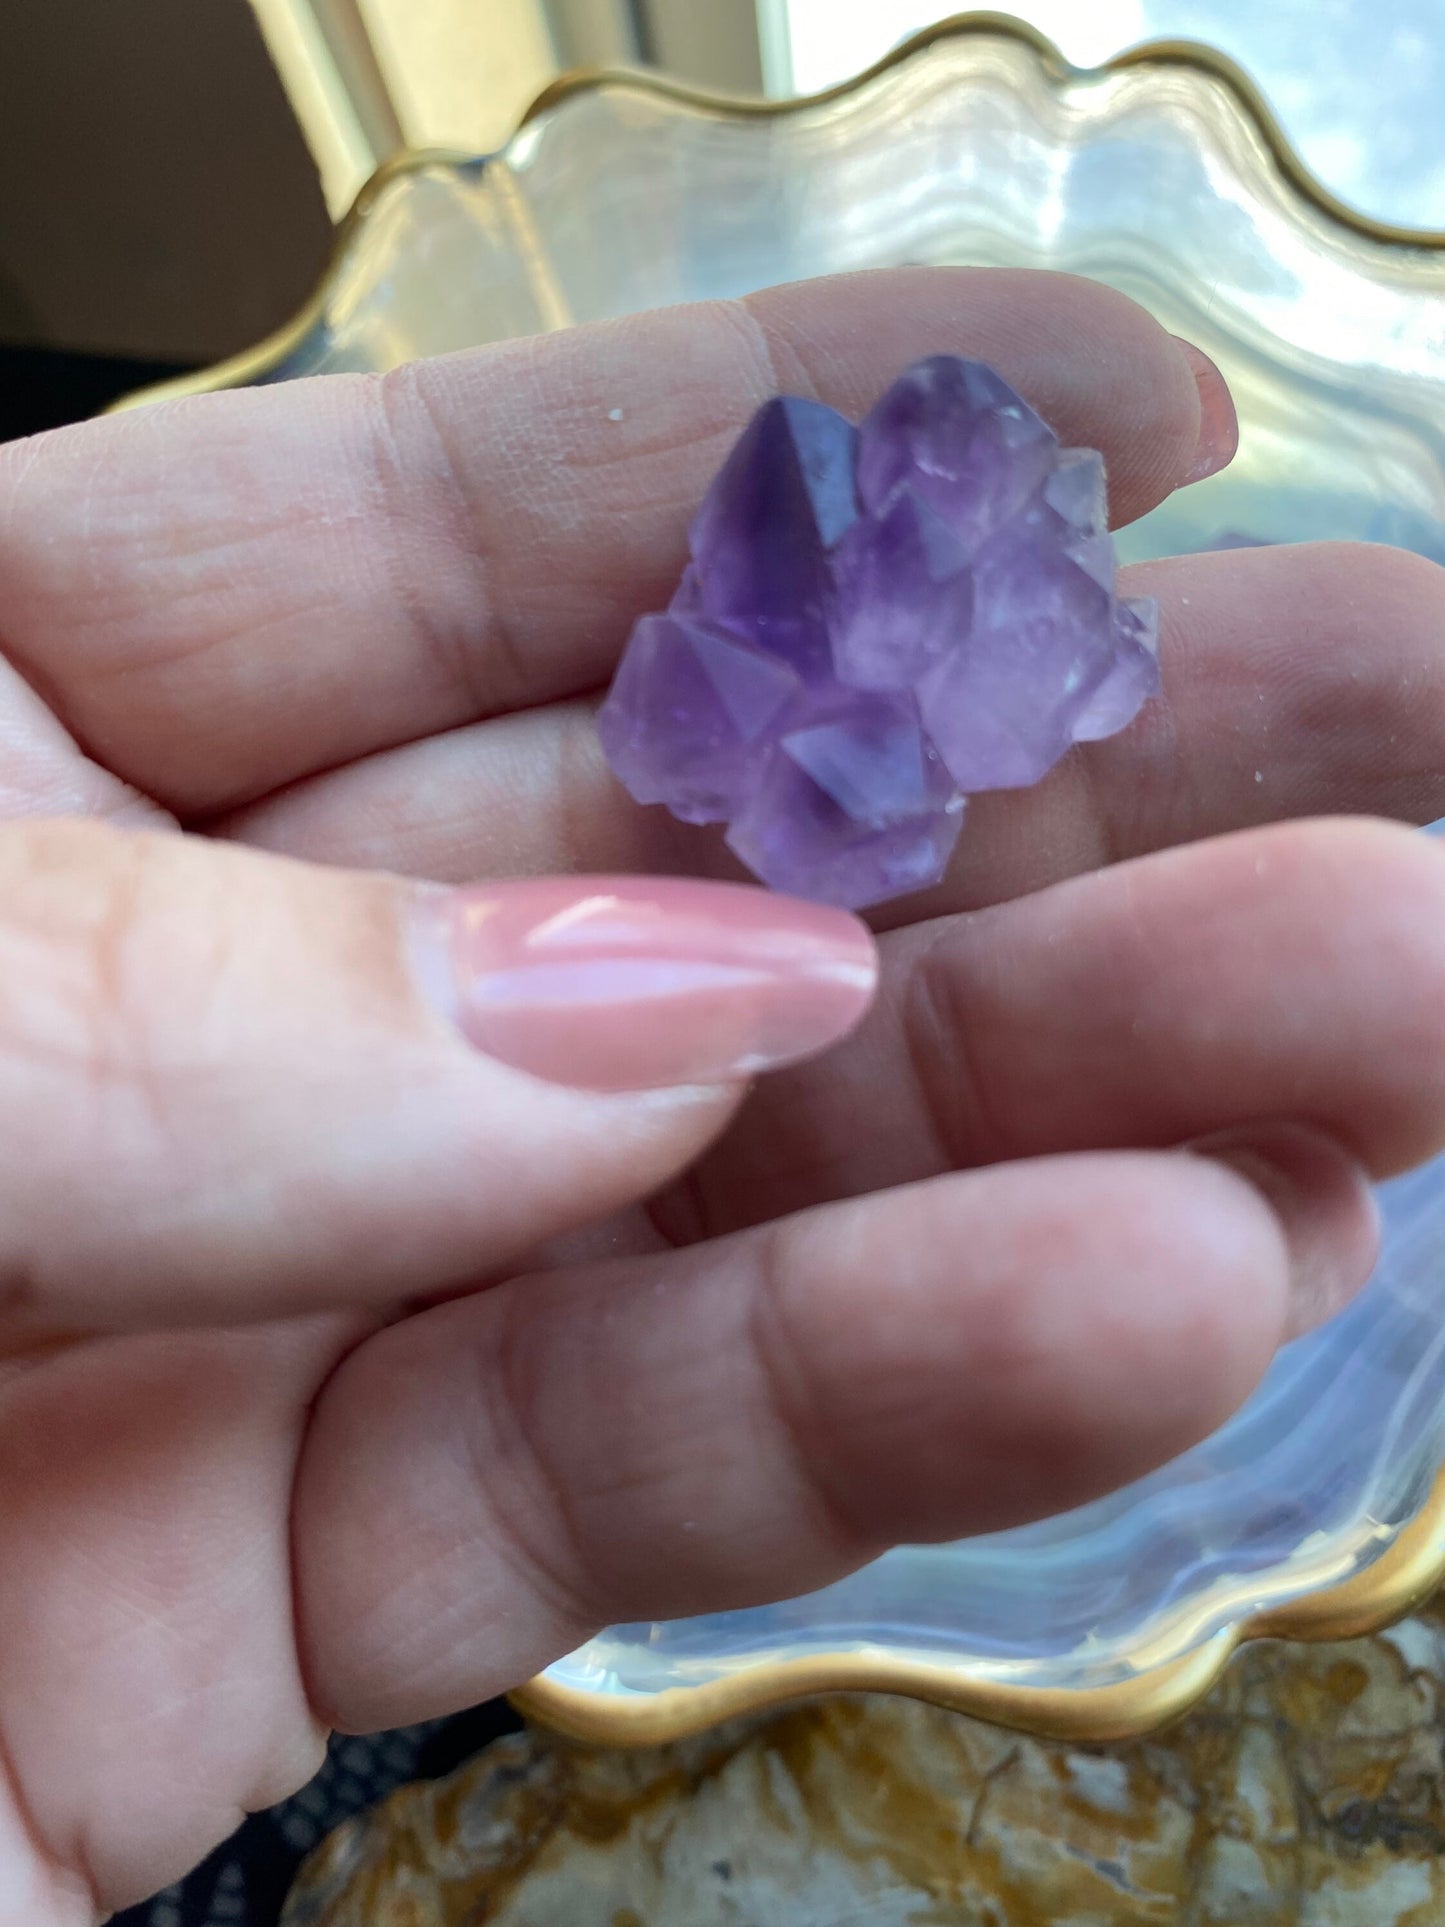 Set of 2 Raw Amethyst Clusters- intuitively picked | Amethyst Flowers | Crystal Tumbles | Purple Specimen | Mini Amethyst | Craft Supply